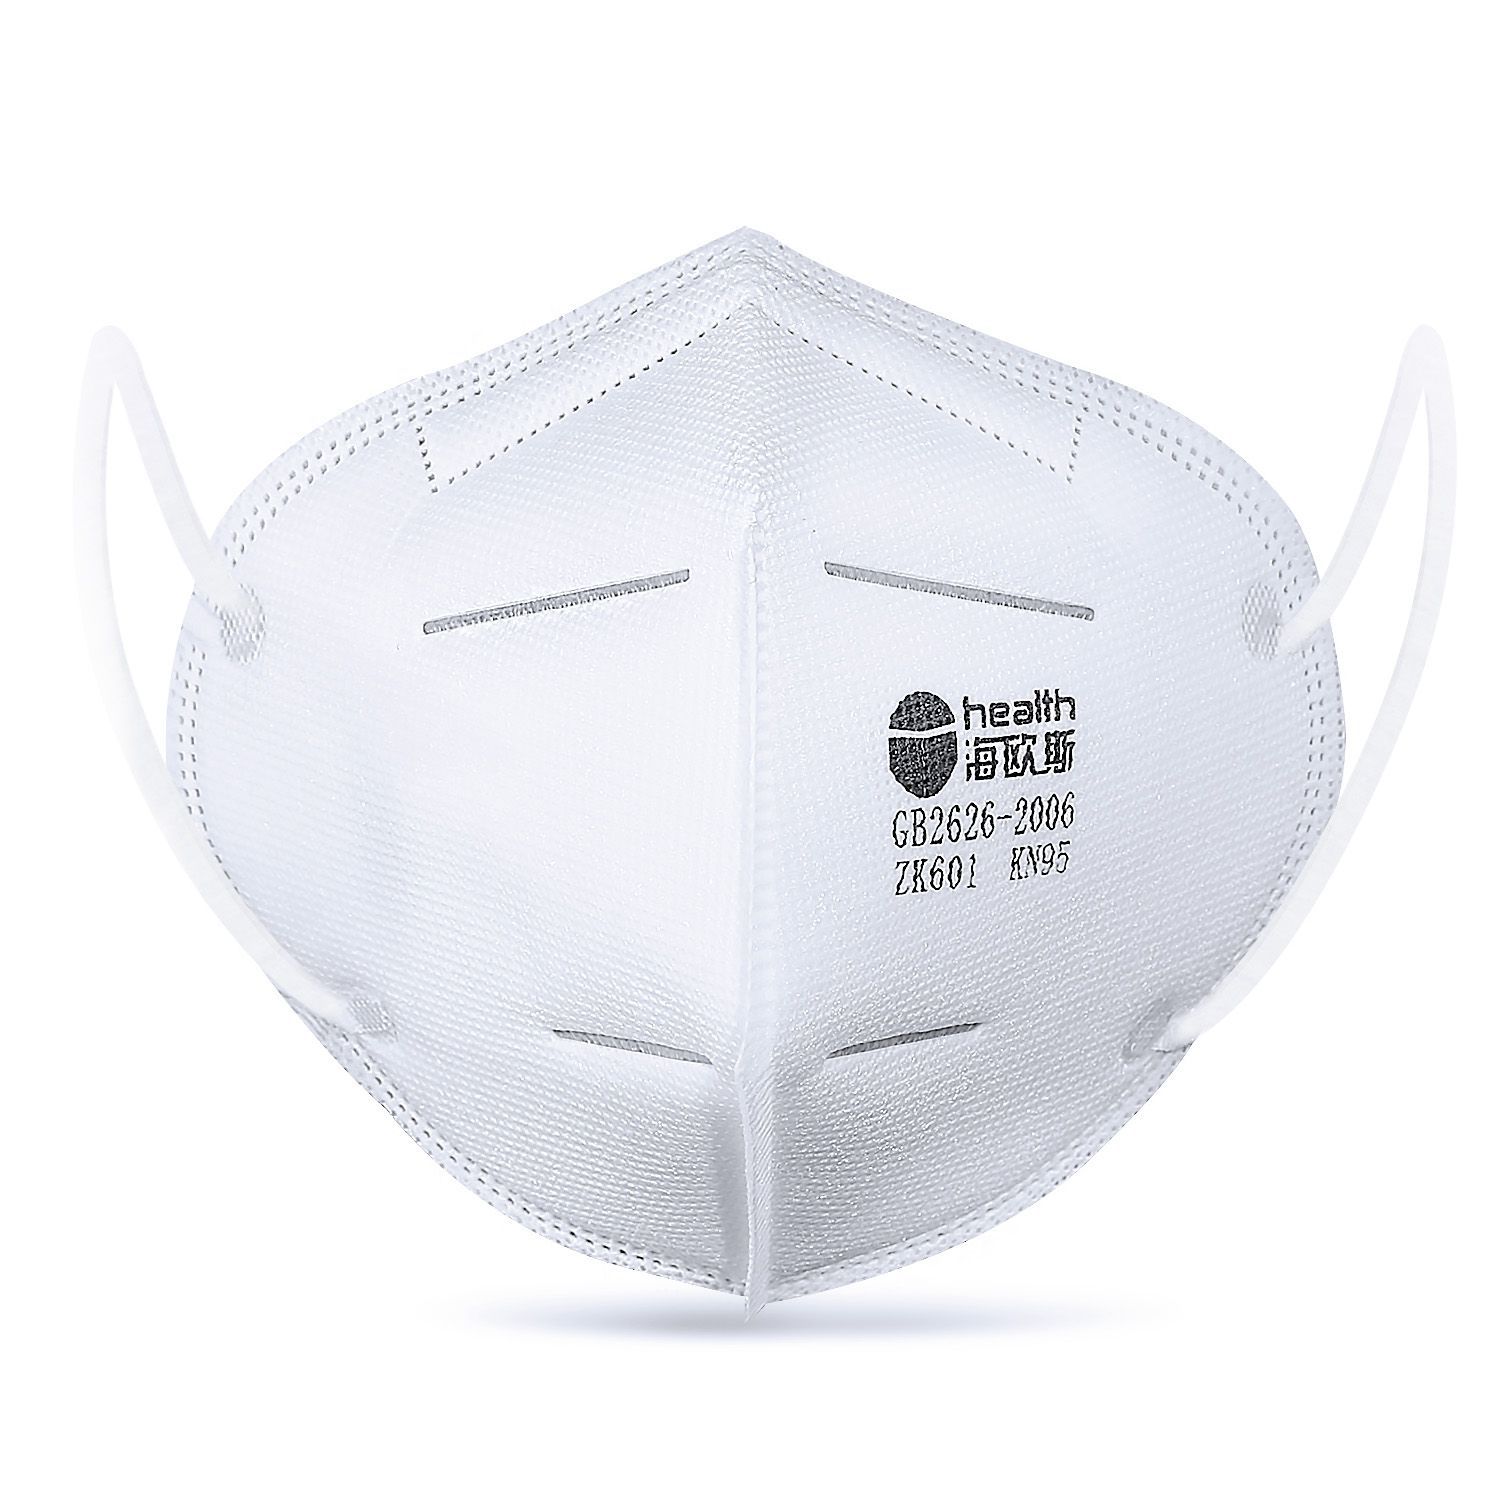 KN95 Masks with 2 pcs Filter Paper - Protection Mouth Mask - Sealed Bag -Protective Face Mask Dust Filter Mouth Cover